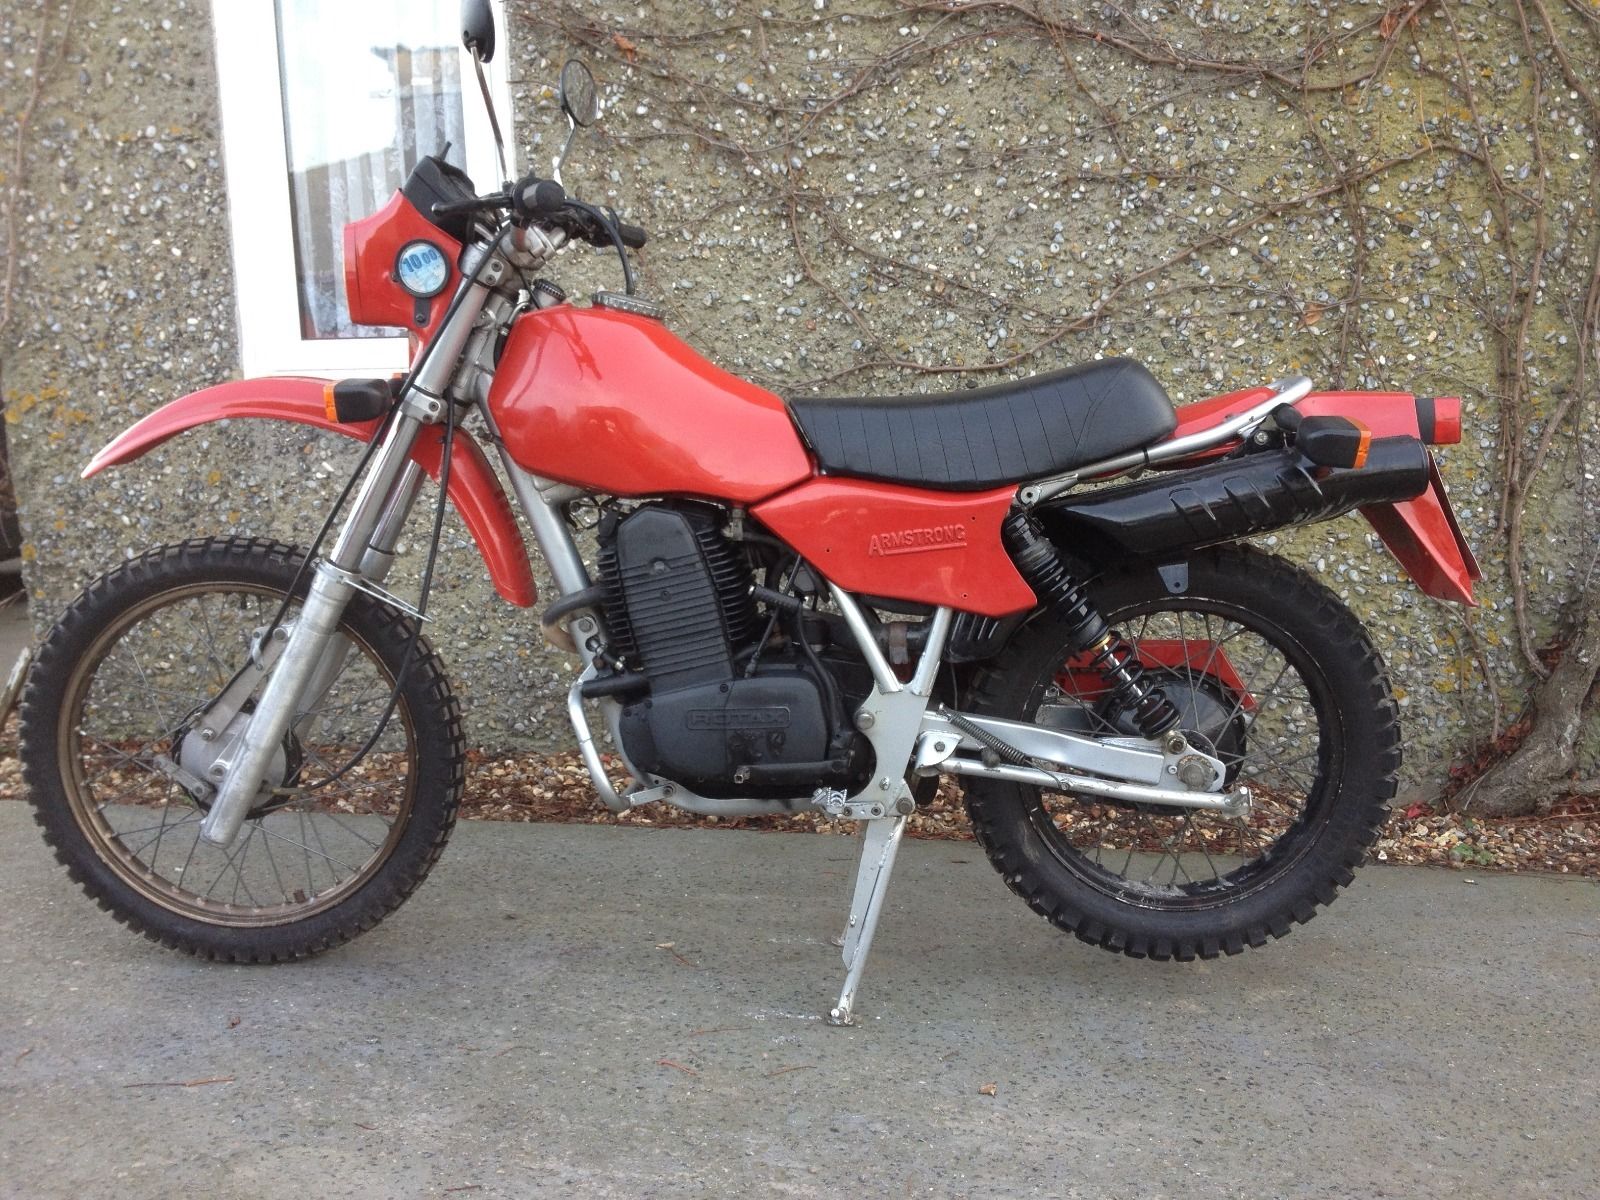 Armstrong Mt500 Fully Restored Road Legal Enduro Bike